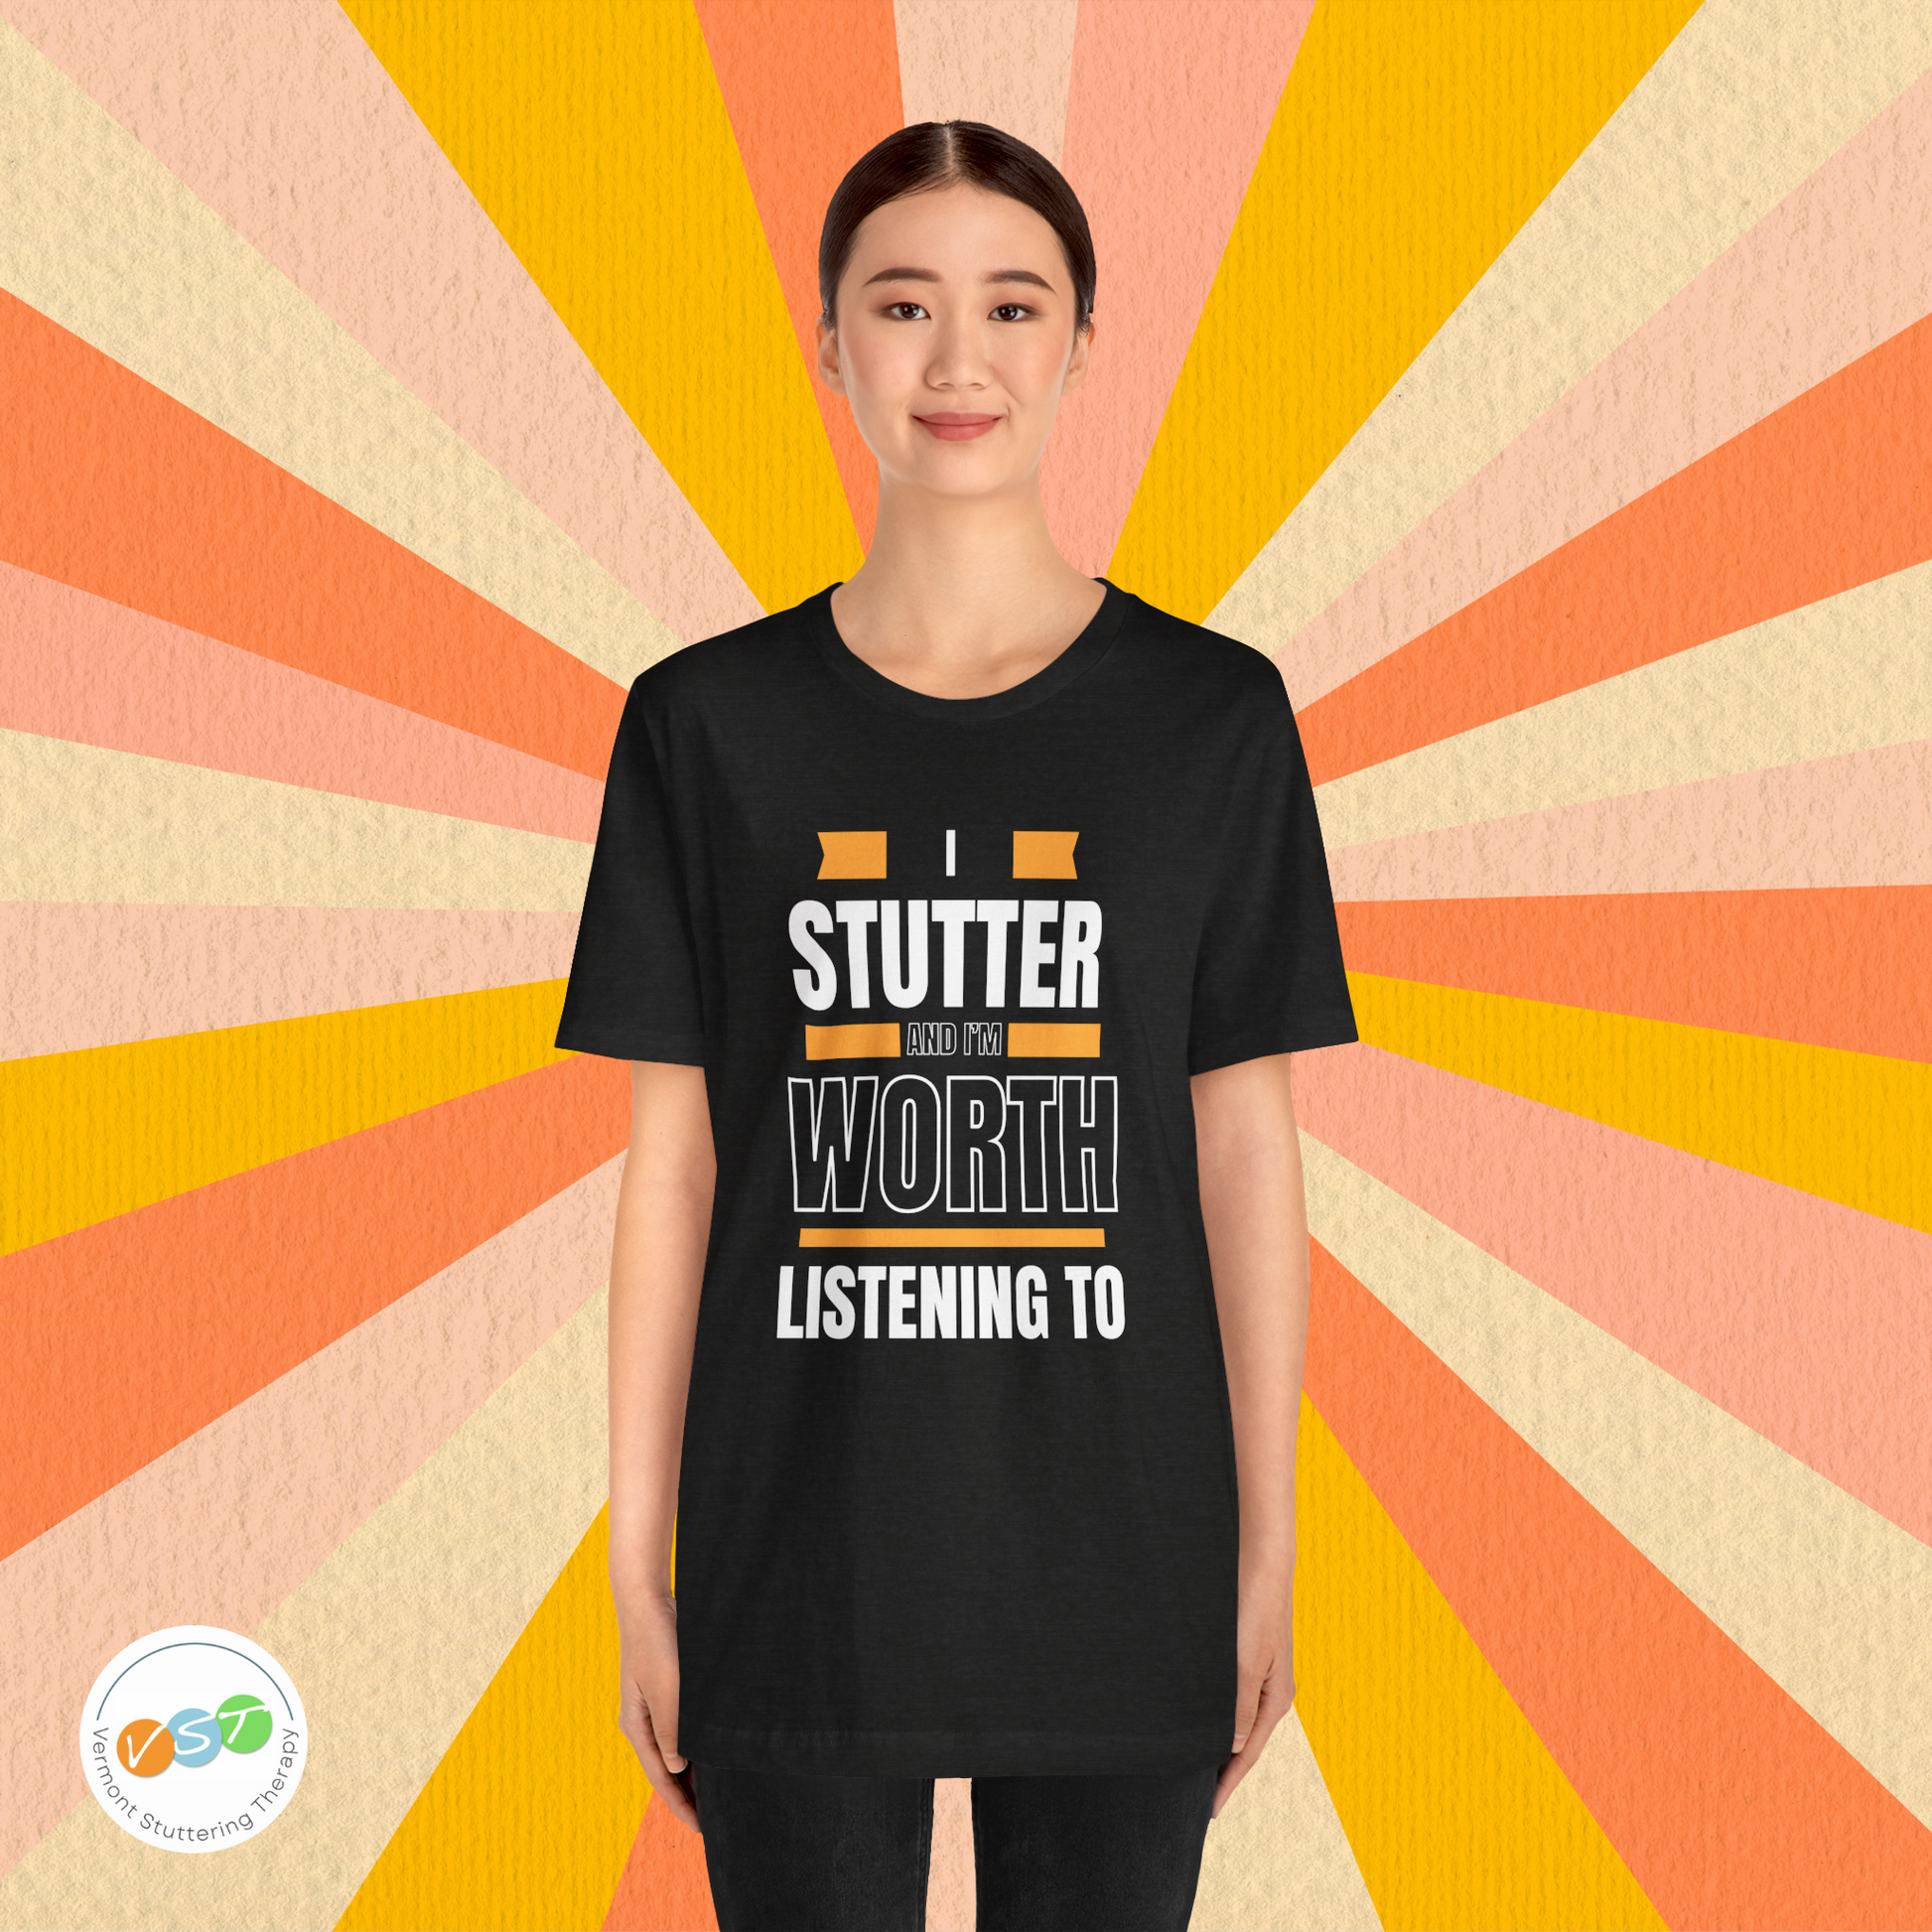 I Stutter and I'm Worth Listening To - Normalize Stuttering Challenge T-Shirt #normalizestutteringchallenge